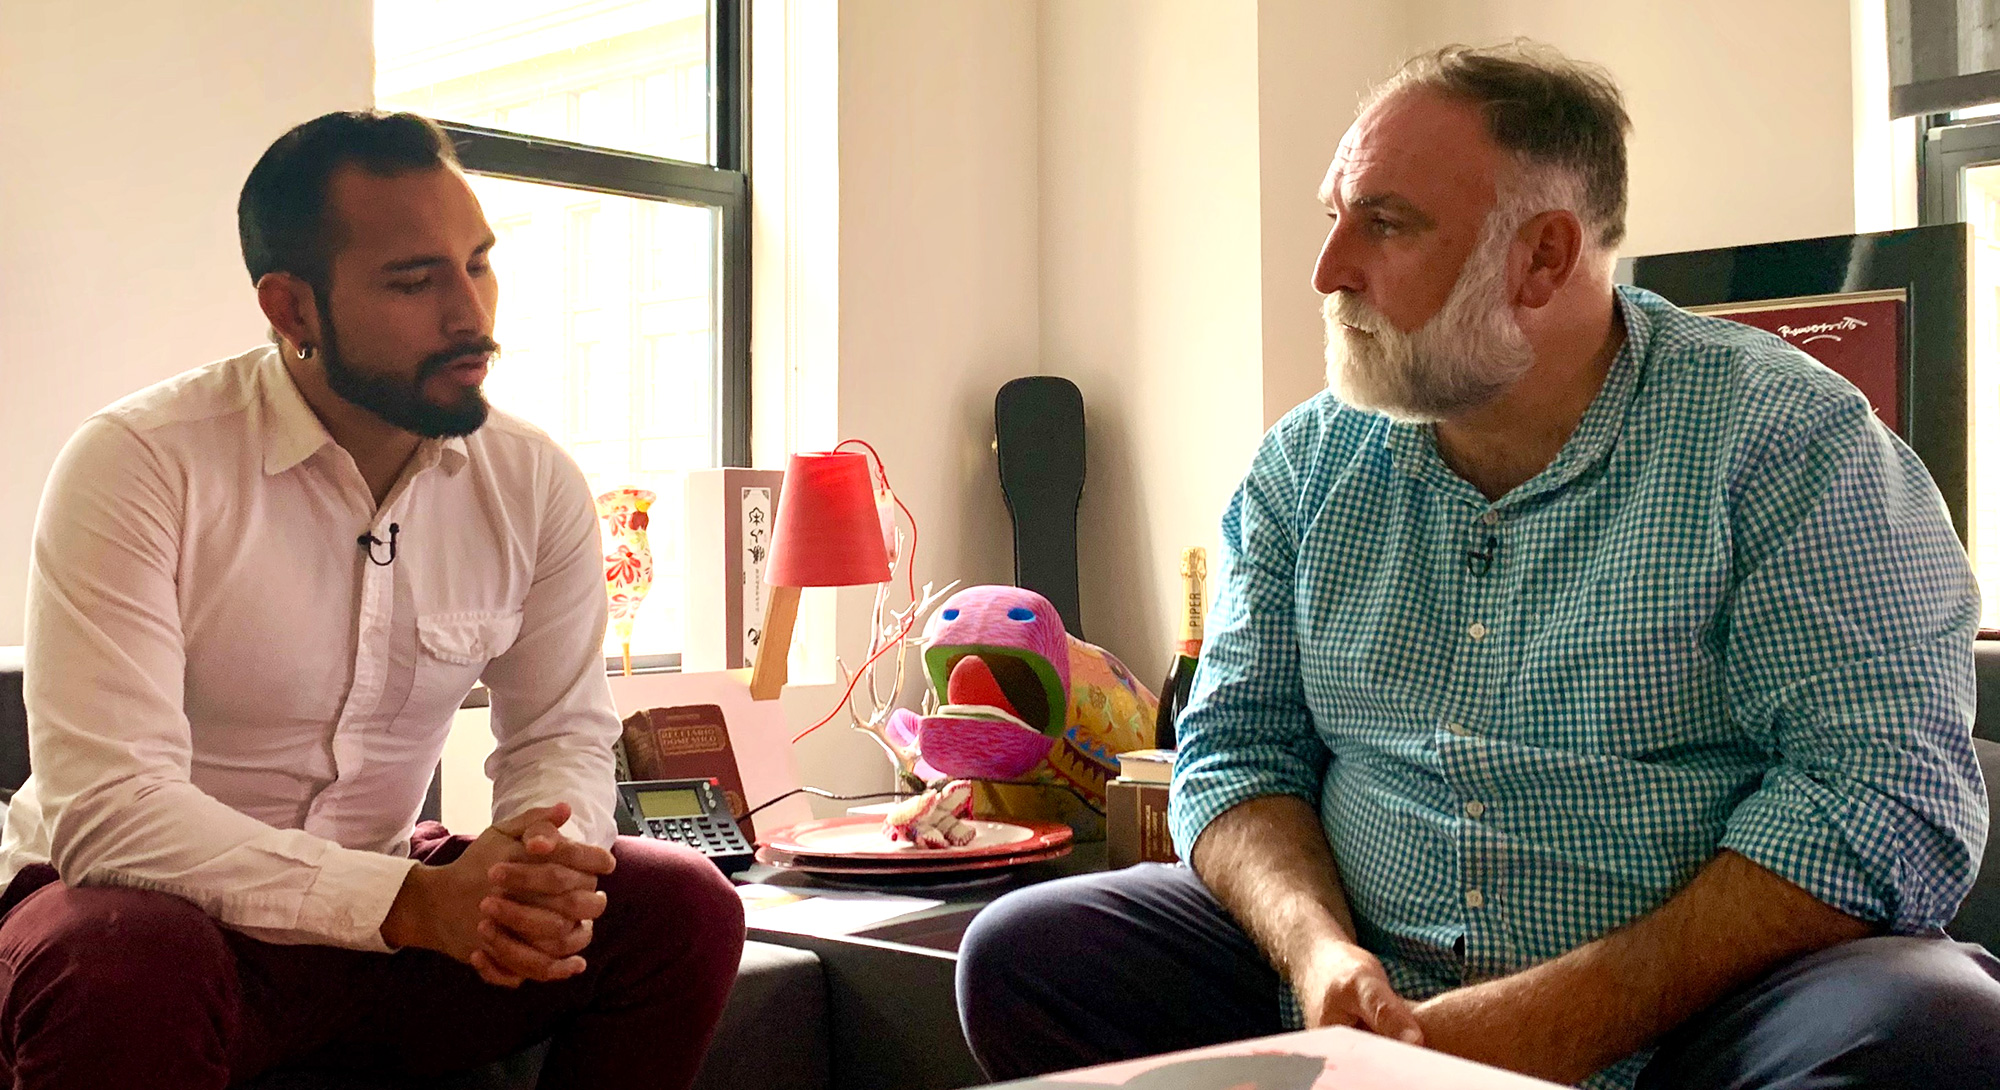 Two men are seated and engaged in conversation. To the left is Alejandro Fuentes-Mena, a young man of Chilean descent with a tightly-cropped beard, wearing a white shirt; to the right is chef José Andrés, a middle-aged man with a grey beard wearing a checked green-and-white shirt.